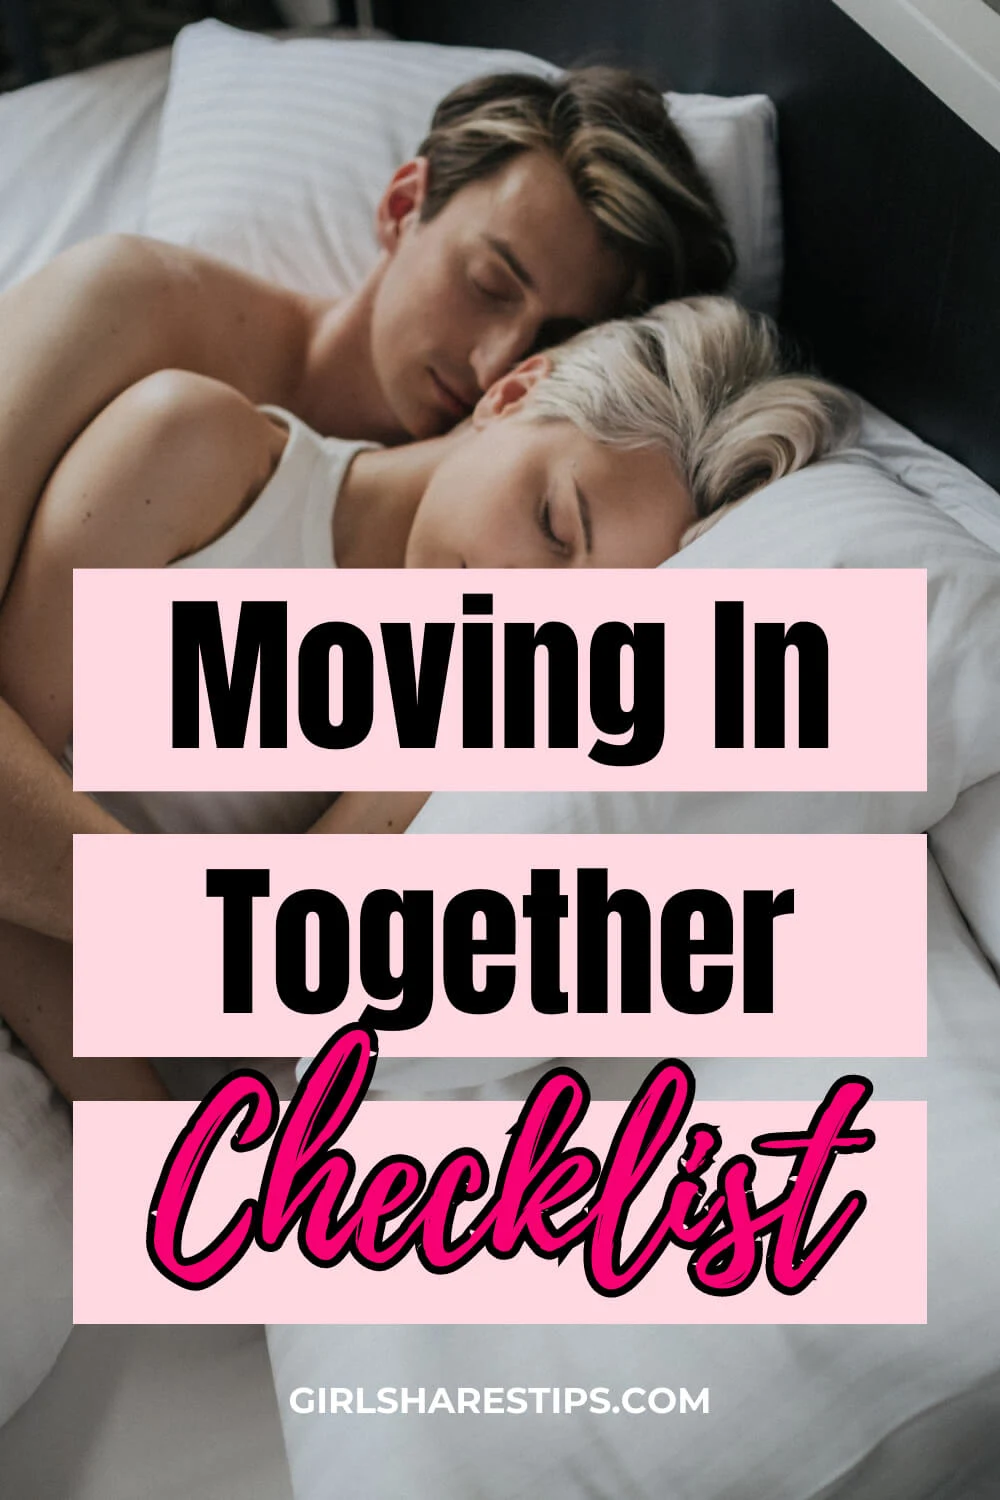 moving in with your boyfriend checklist